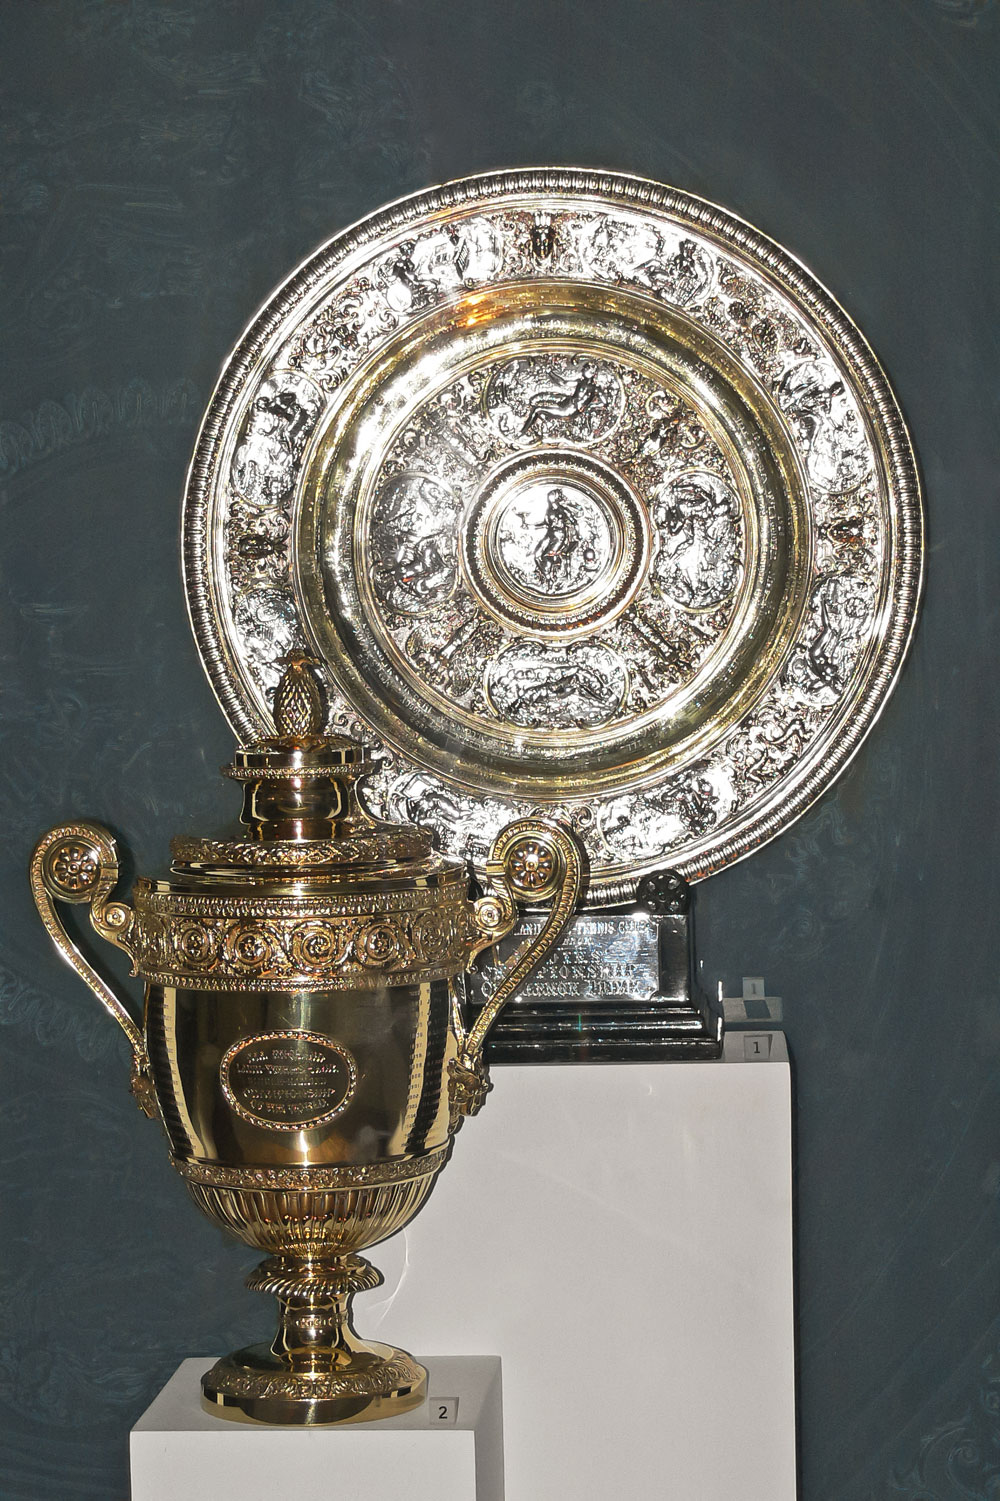 The men's and women's singles trophies